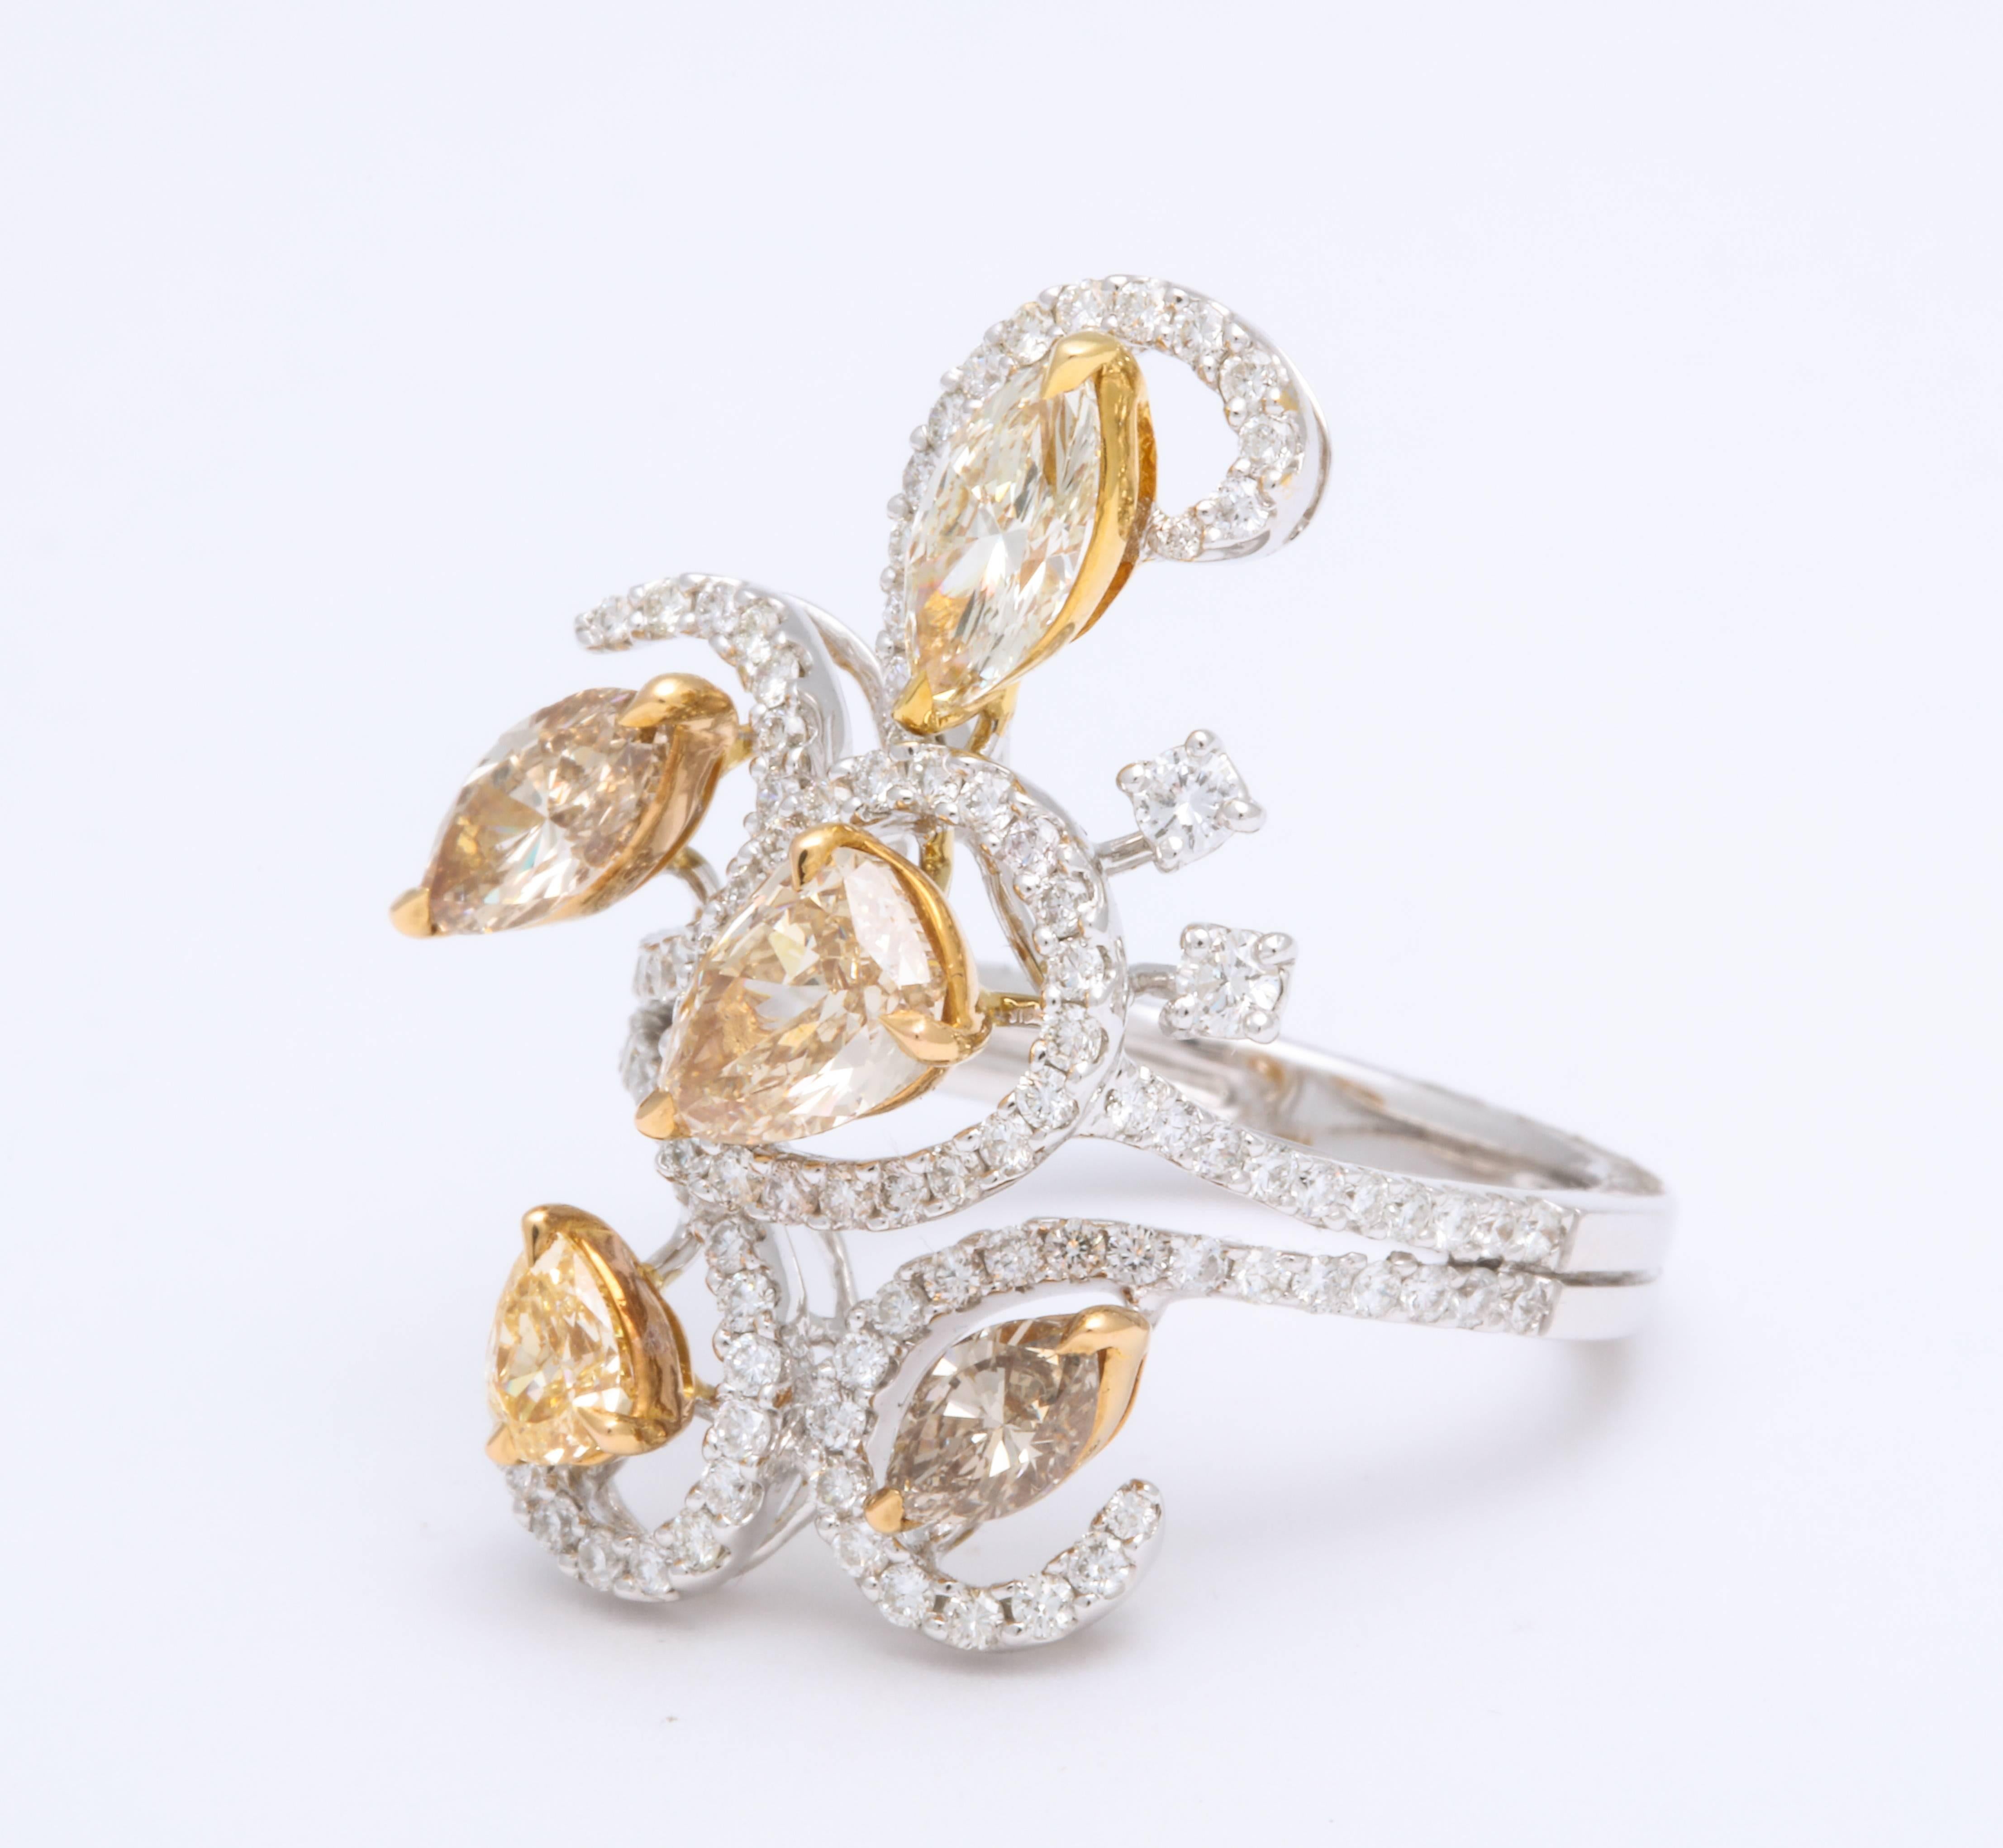 This 18K White Gold Cocktail ring is free form and contemporary, mounted with pear shaped and marquise natural fancy earth tone color diamonds weighing 2.06 carats combined total weight, floating on colorless round brilliant cut diamonds, micro